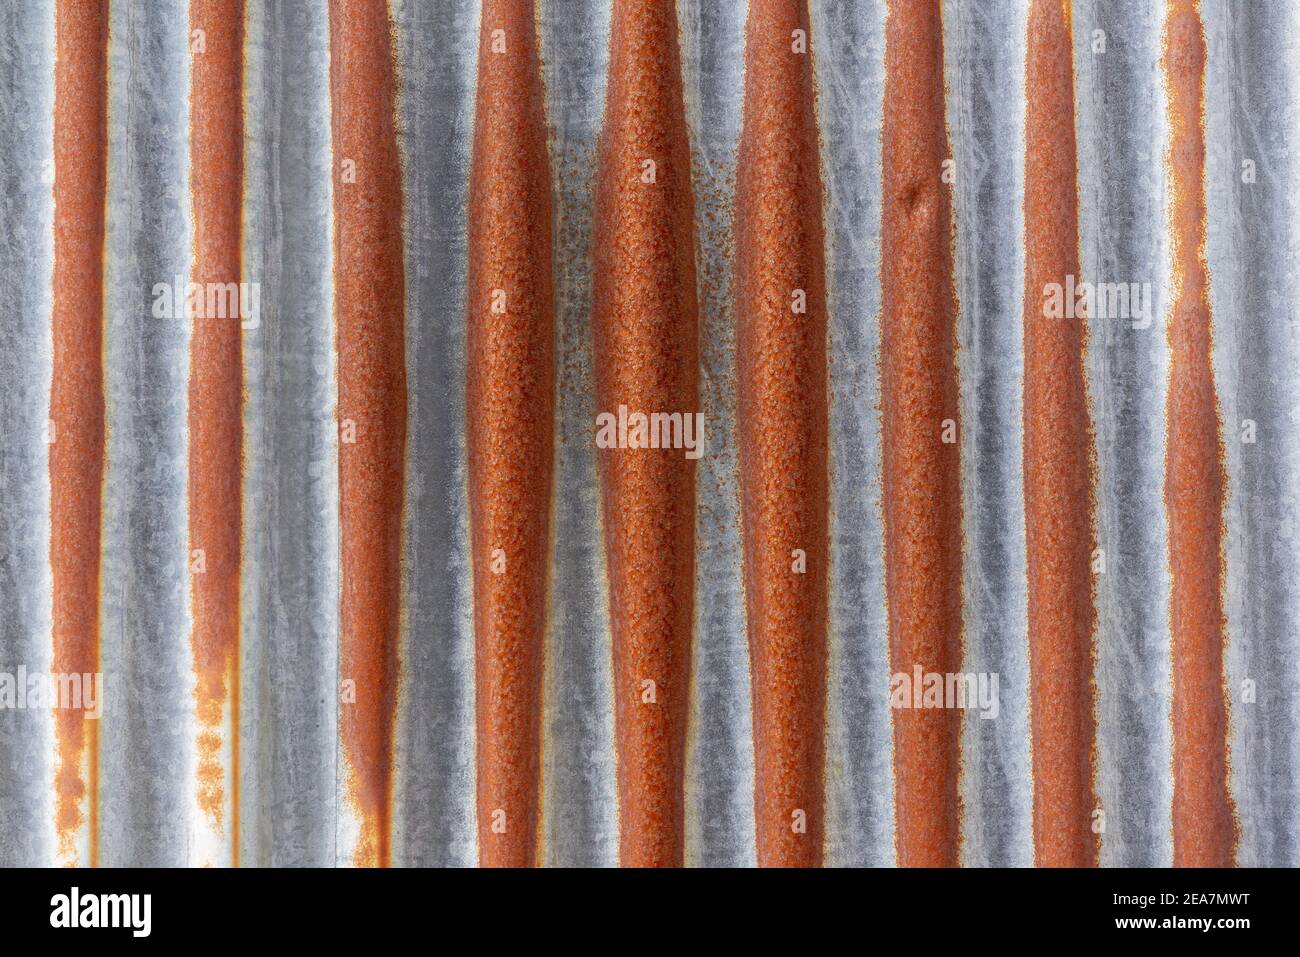 Rusty corrugated iron, vertical lines Stock Photo